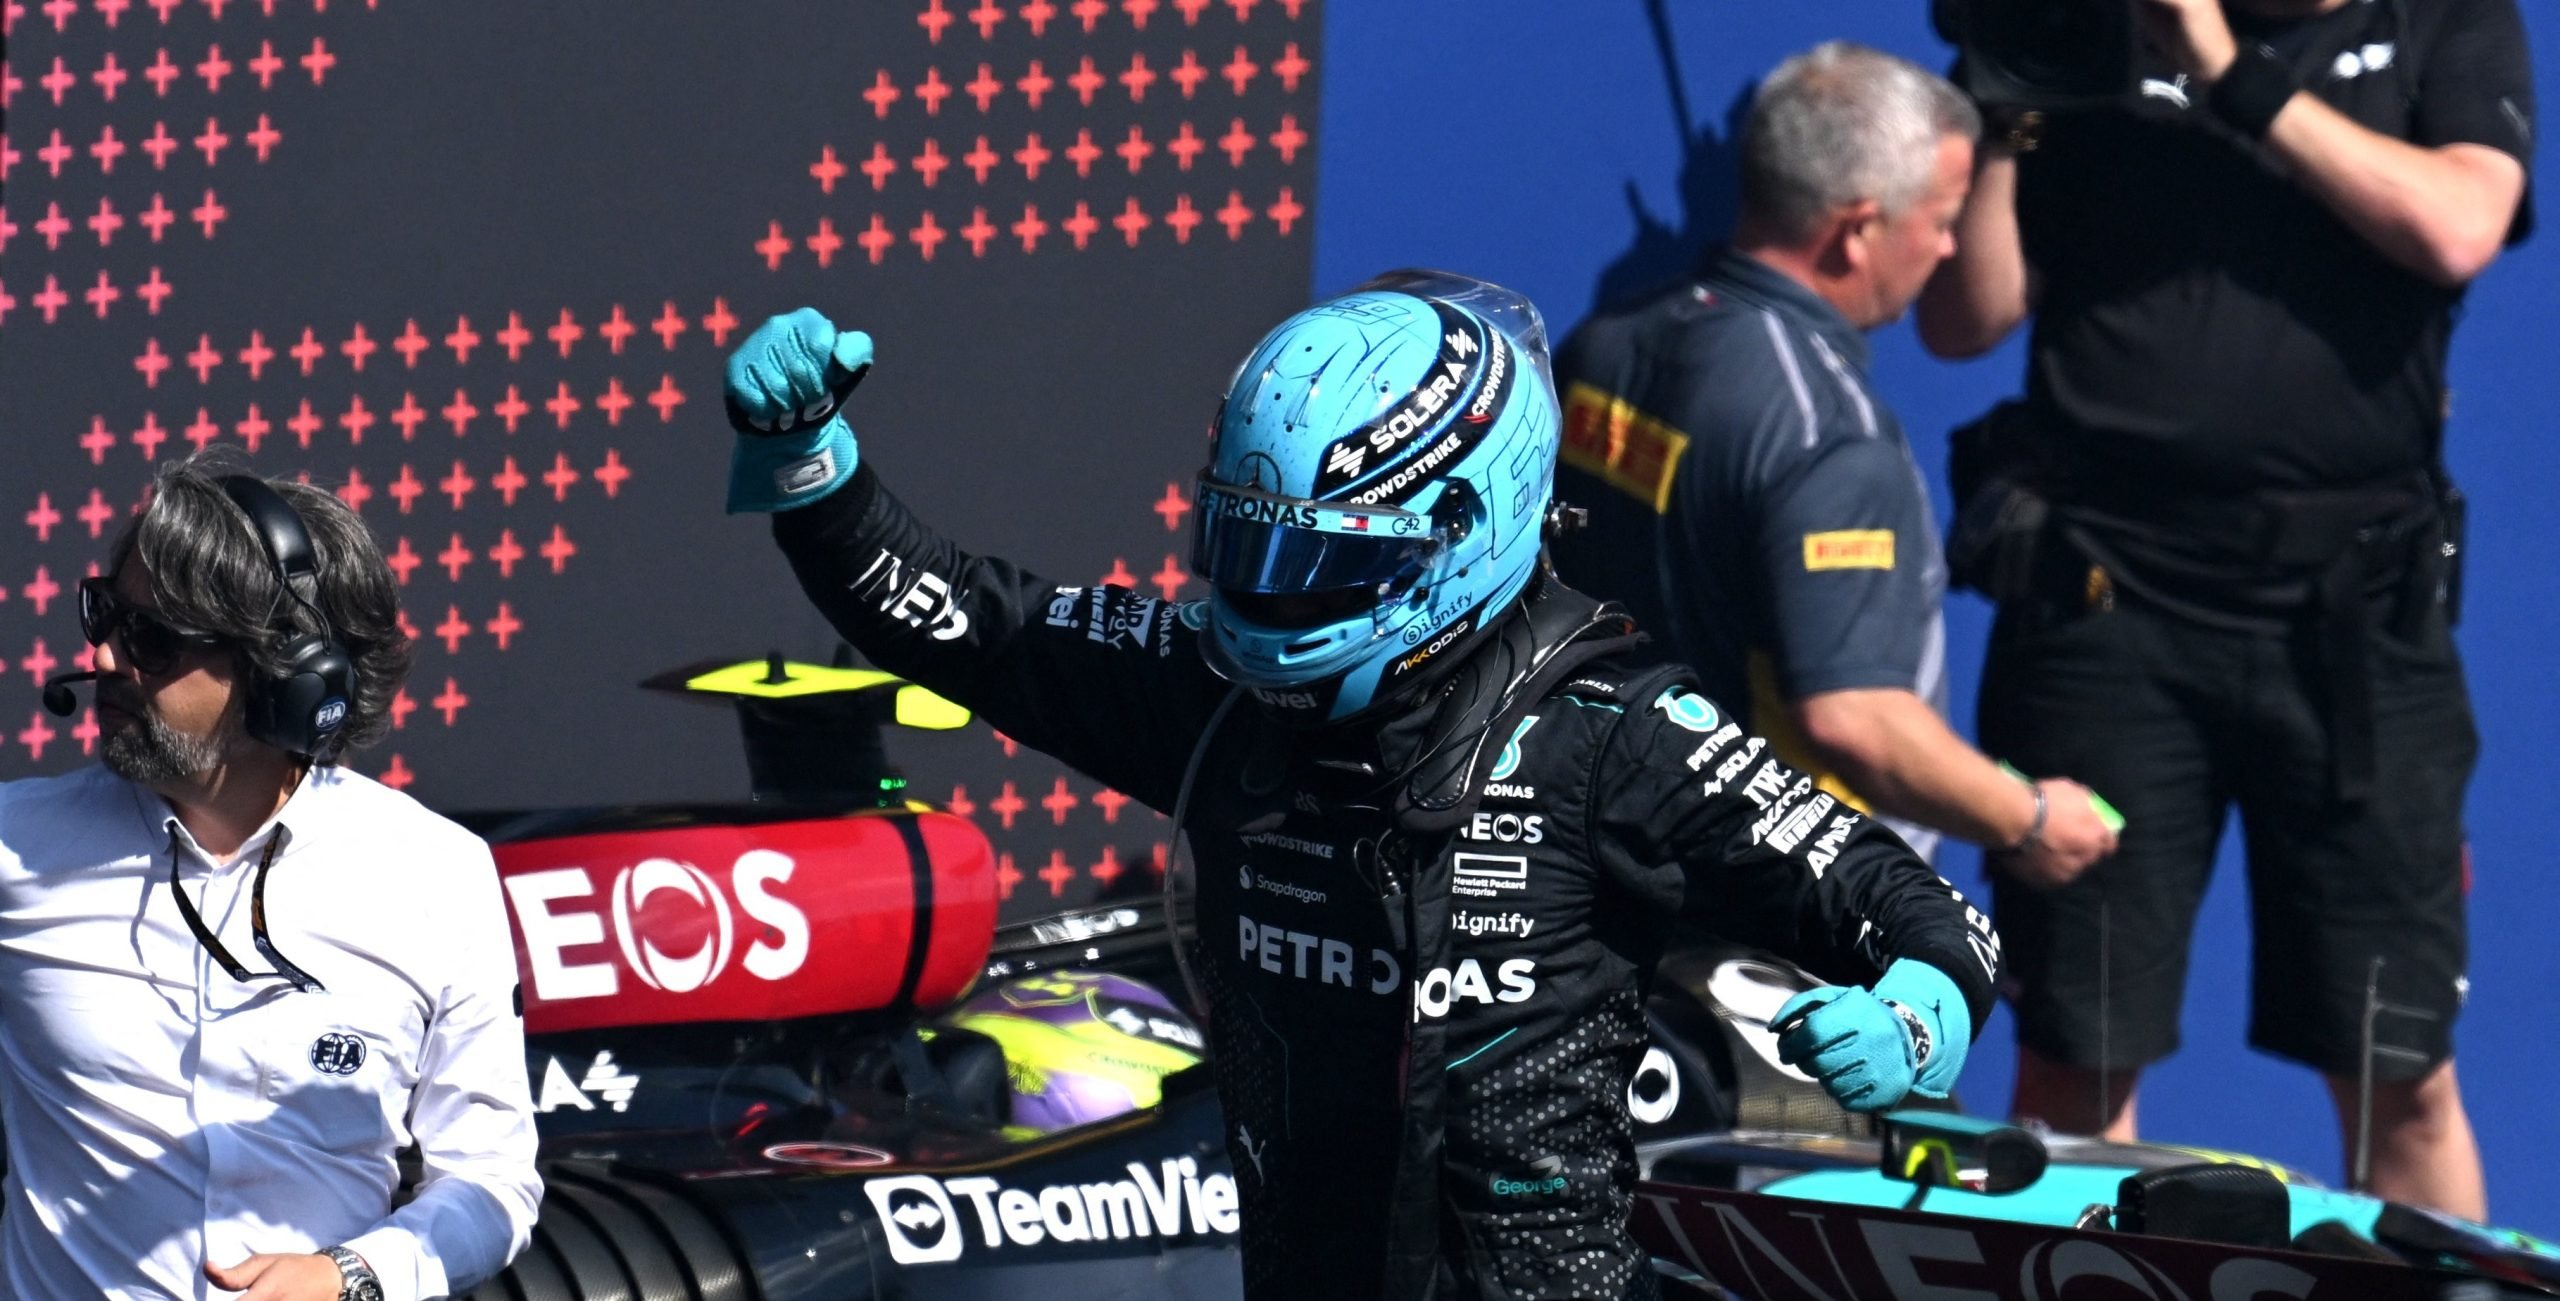 Russell triumphs at the Belgium GP, Mercedes with 1-2 at Spa 5